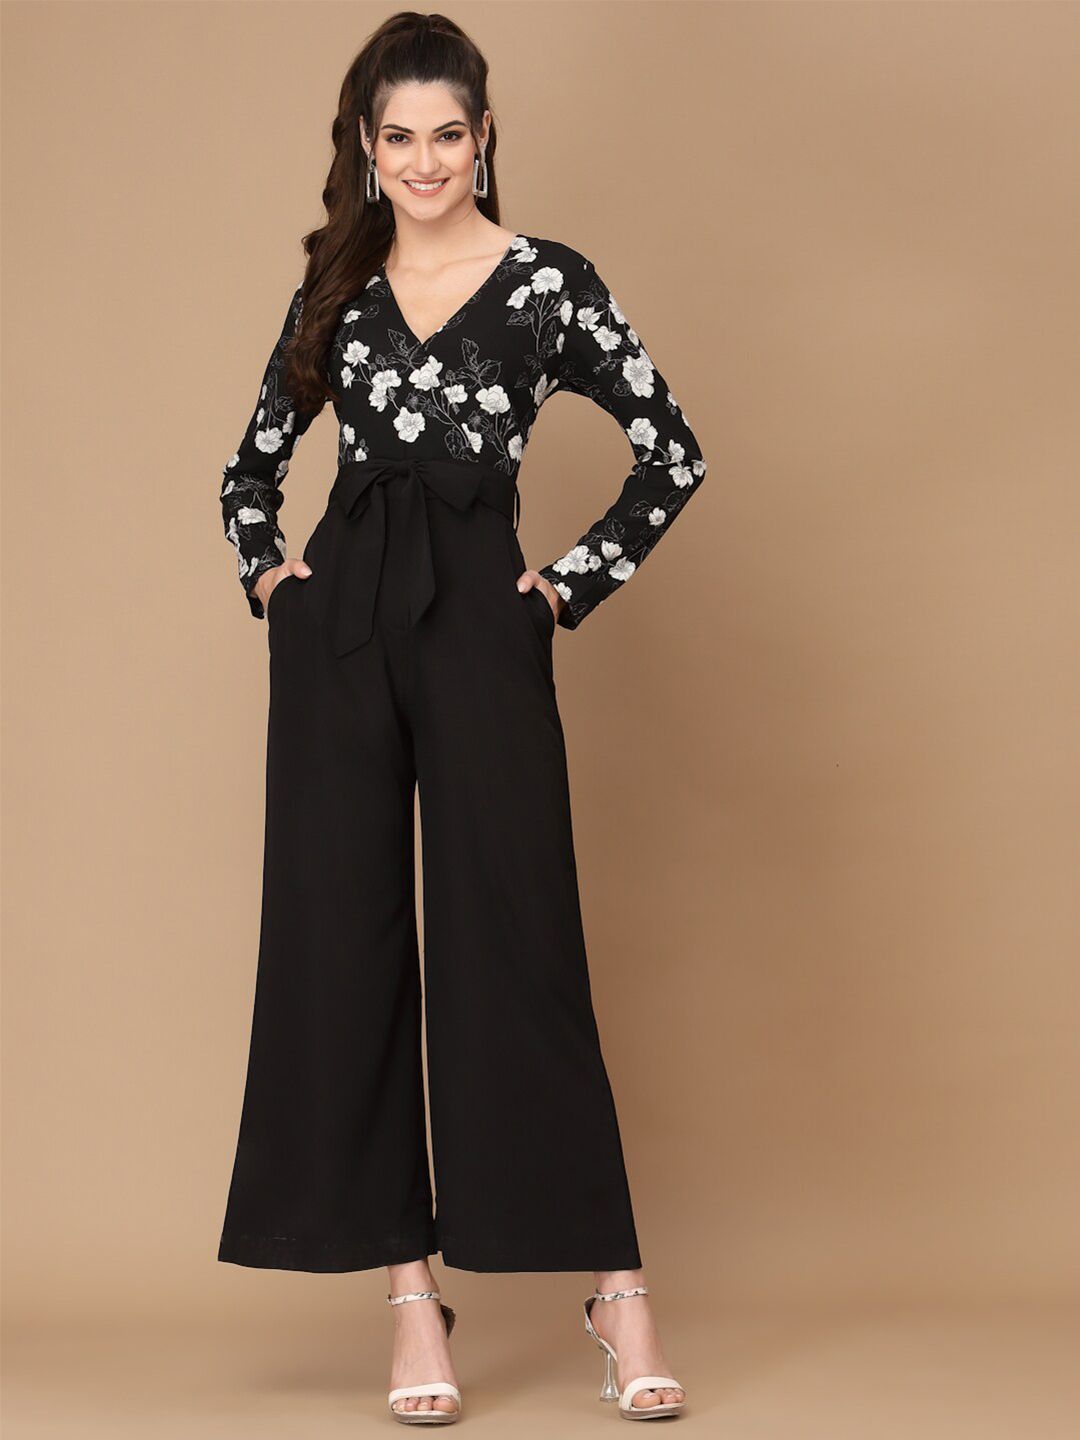 KASSUALLY Black & White Printed Basic Jumpsuit Price in India